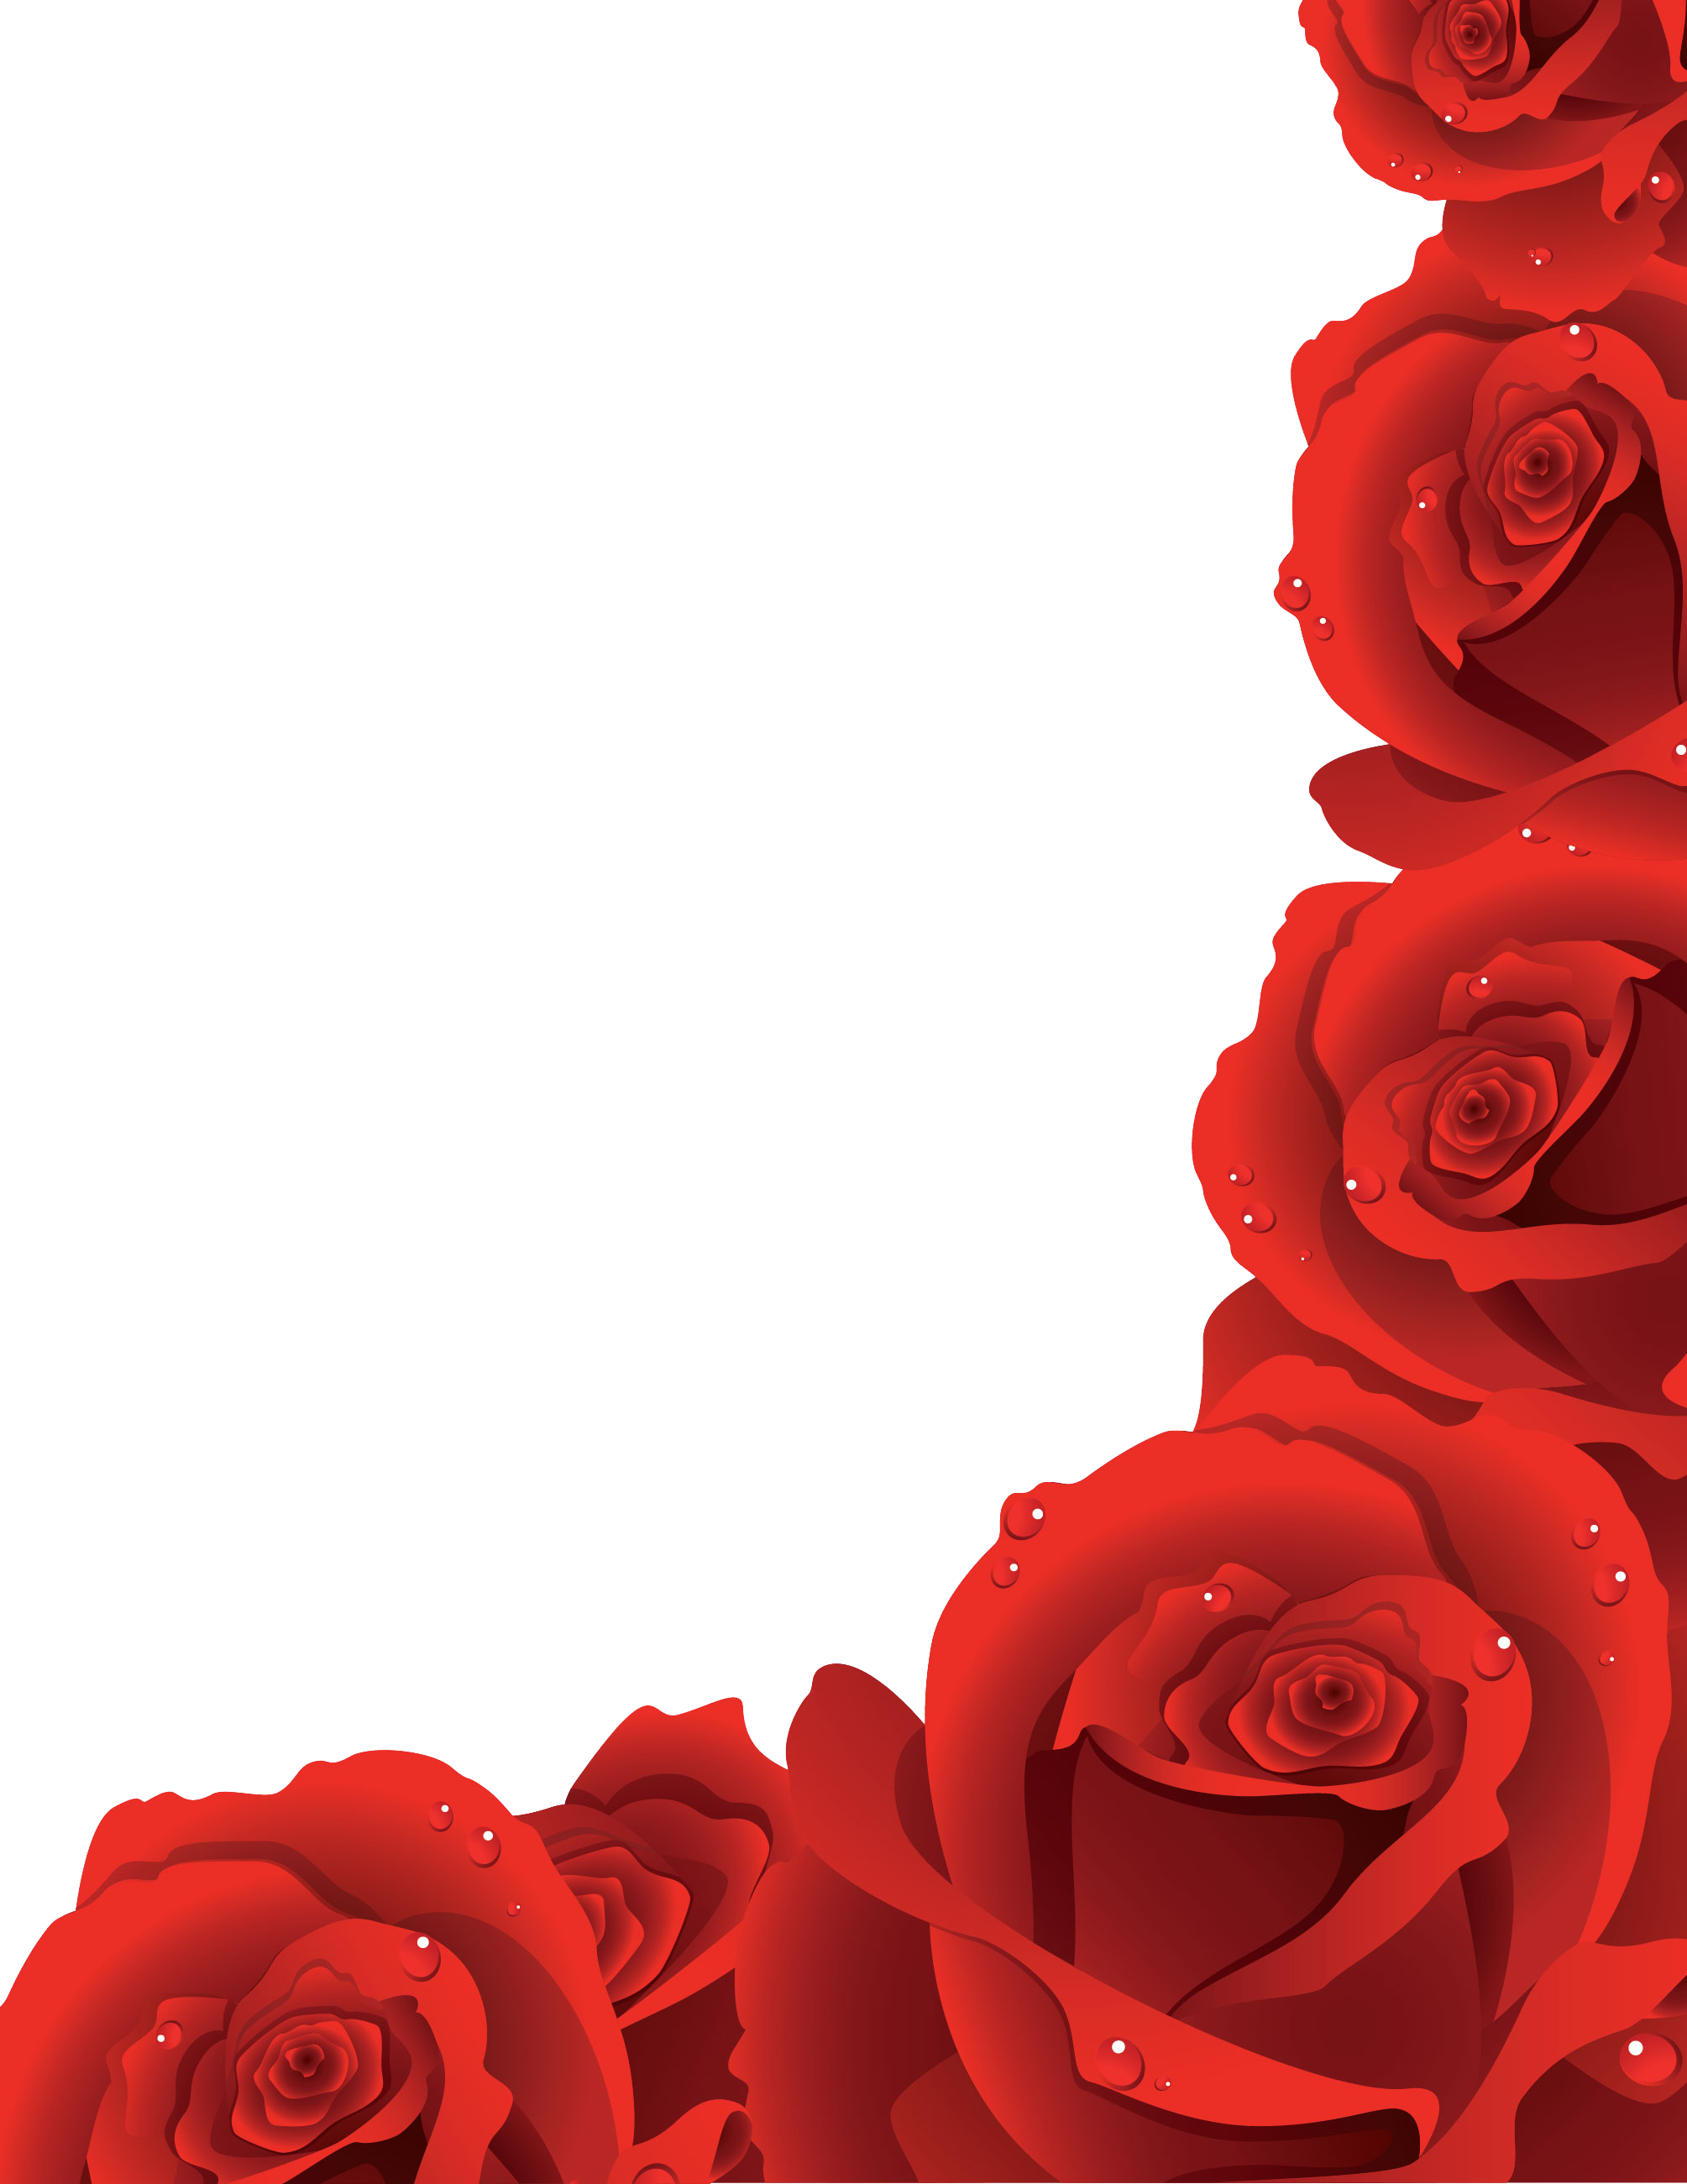 Yükle Red Rose Petals Vector Material, Background, - True Love Poems For Her From The Heart (2009x2601)